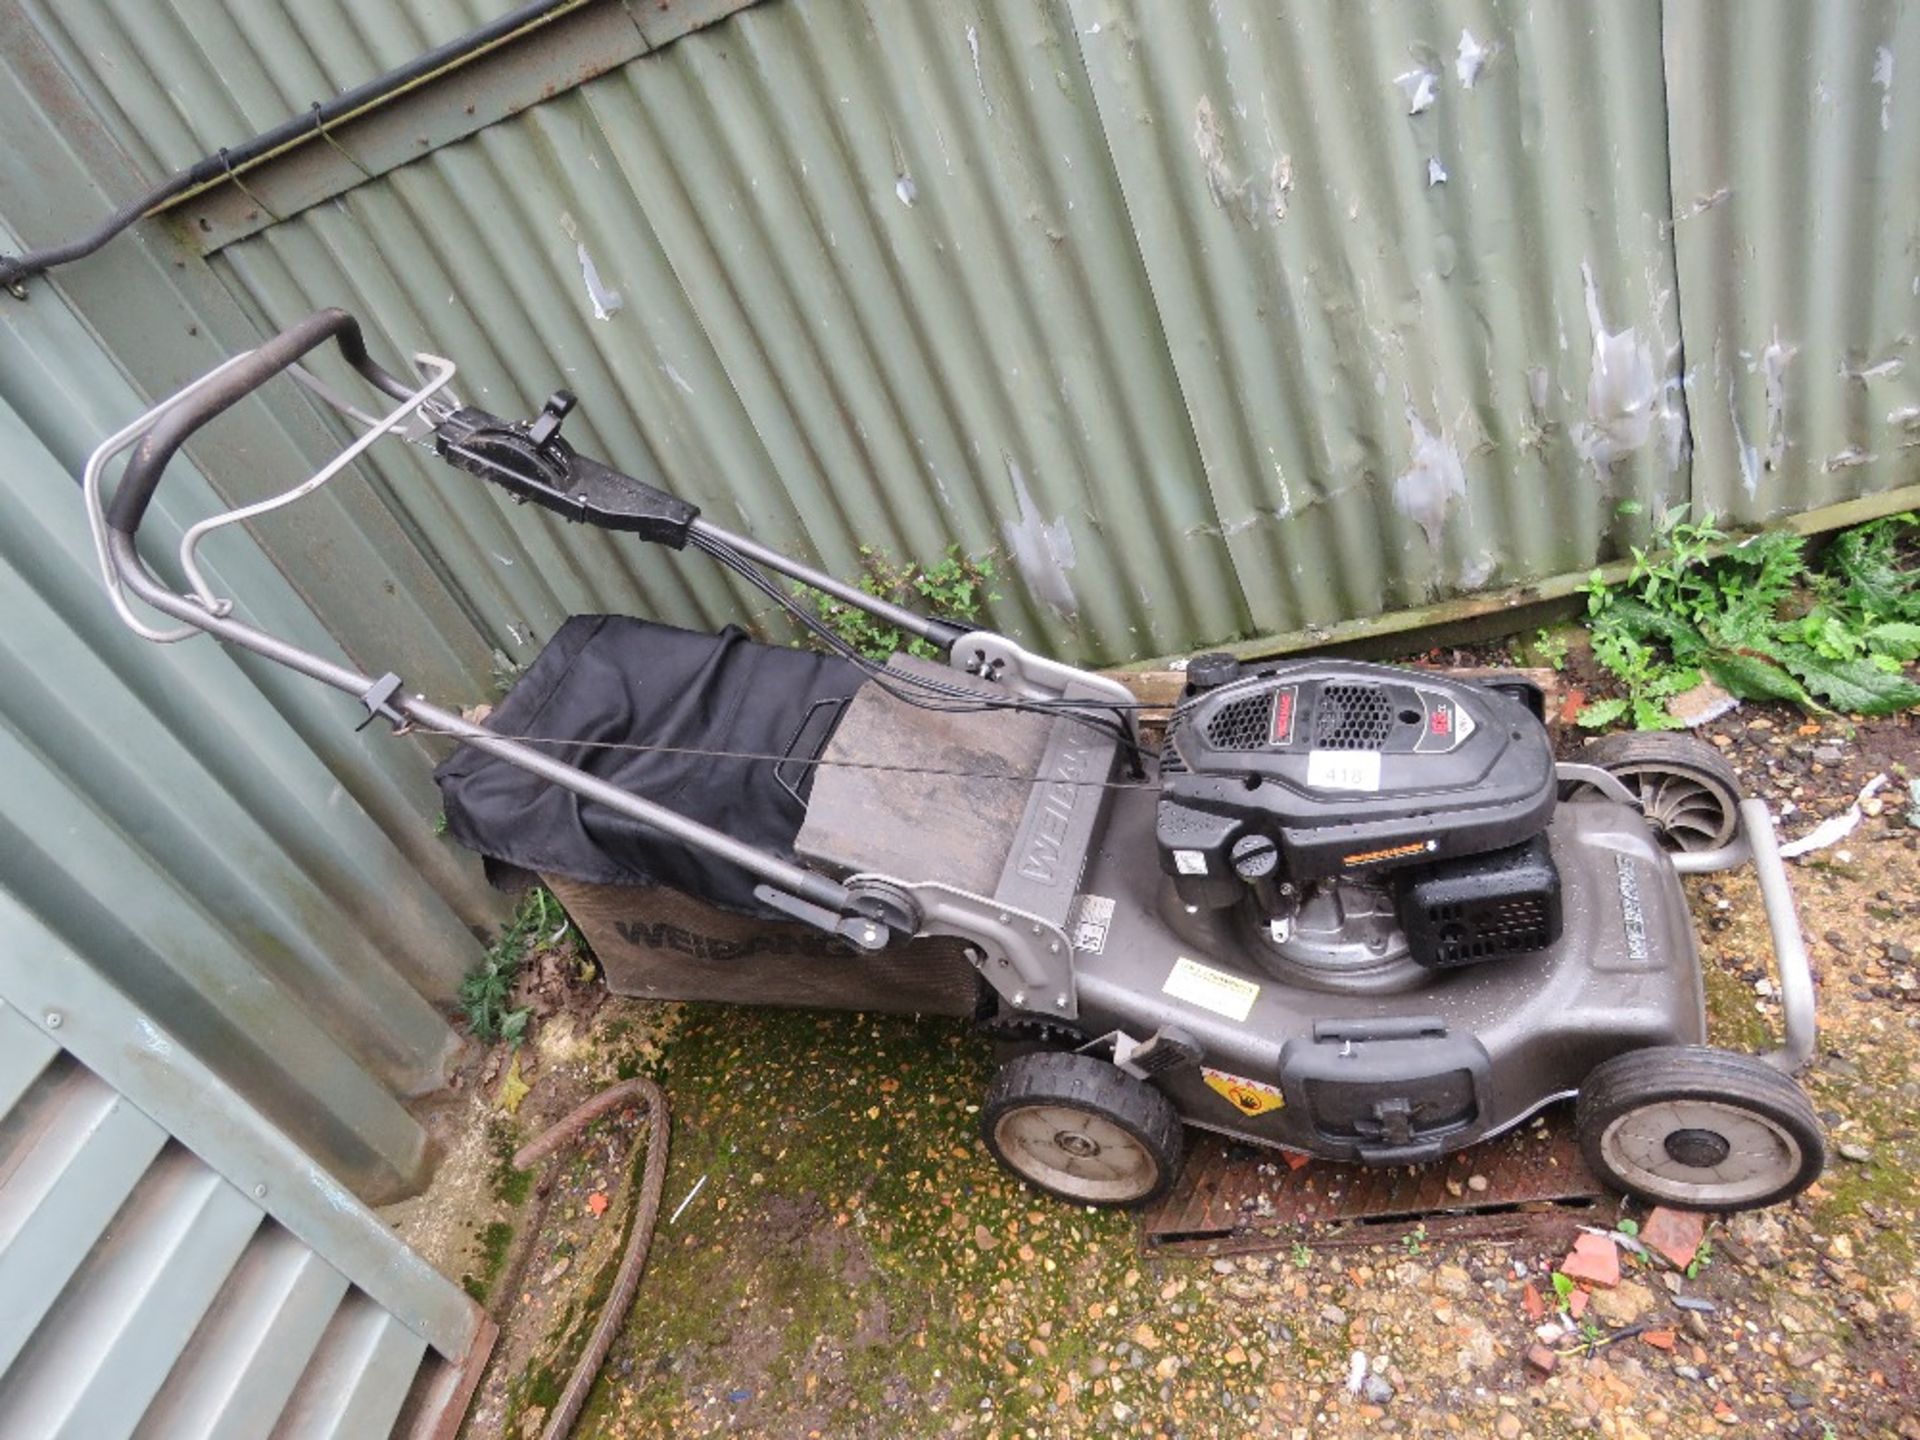 WEIBANG PROFESSIONAL LAWNMOWER WITH COLLECTOR. DIRECT FROM LOCAL LANDSCAPE COMPANY WHO ARE CLOSING A